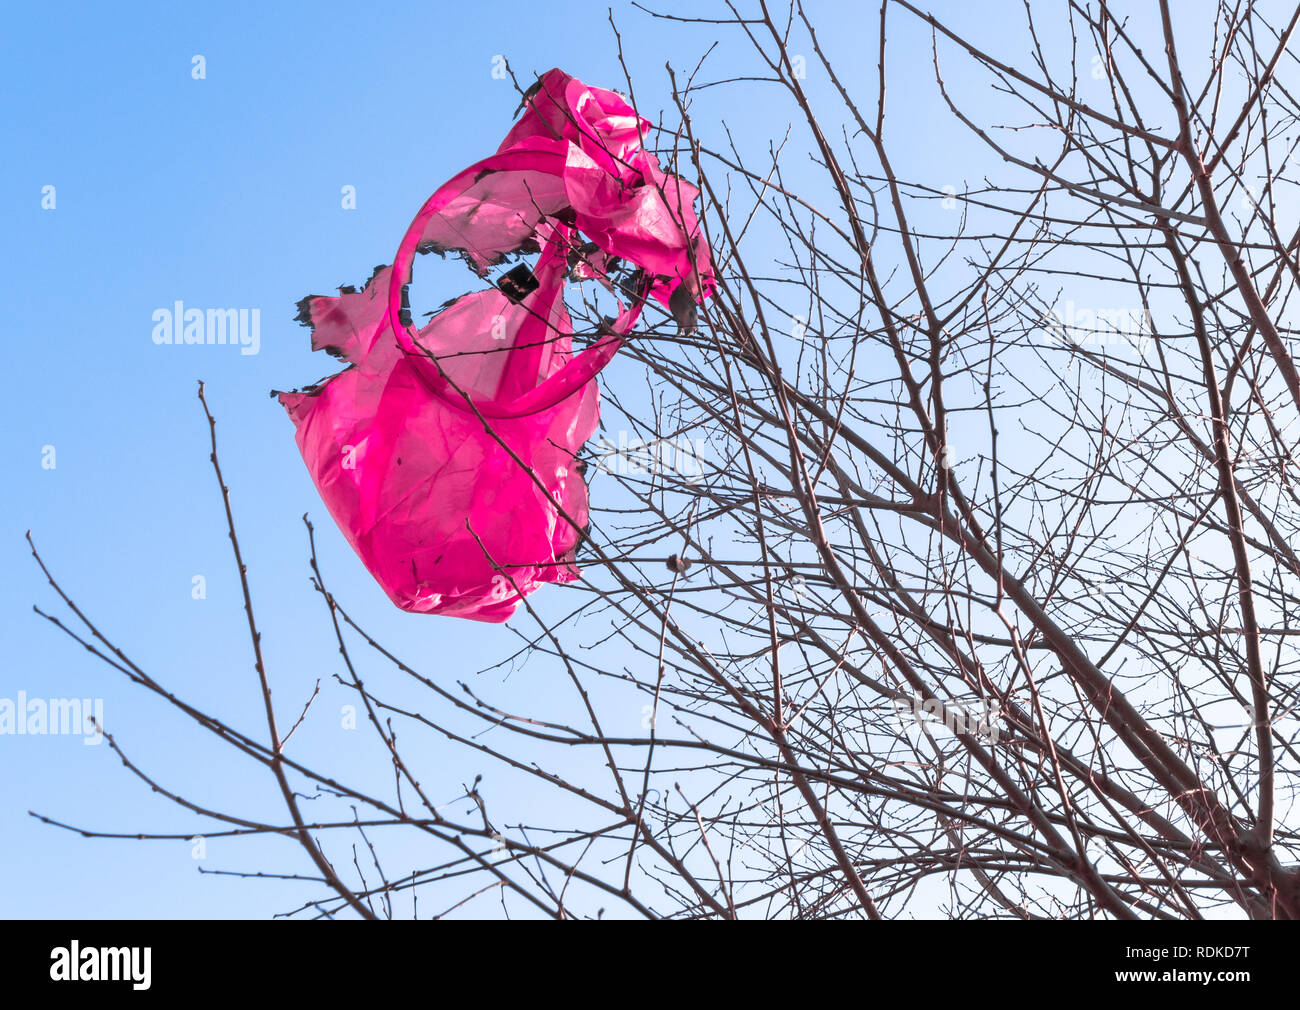 Remains of a burned flying lantern, entangled in the branches of a tree. The hidden dangers of those magical sky lantern festivals. Stock Photo